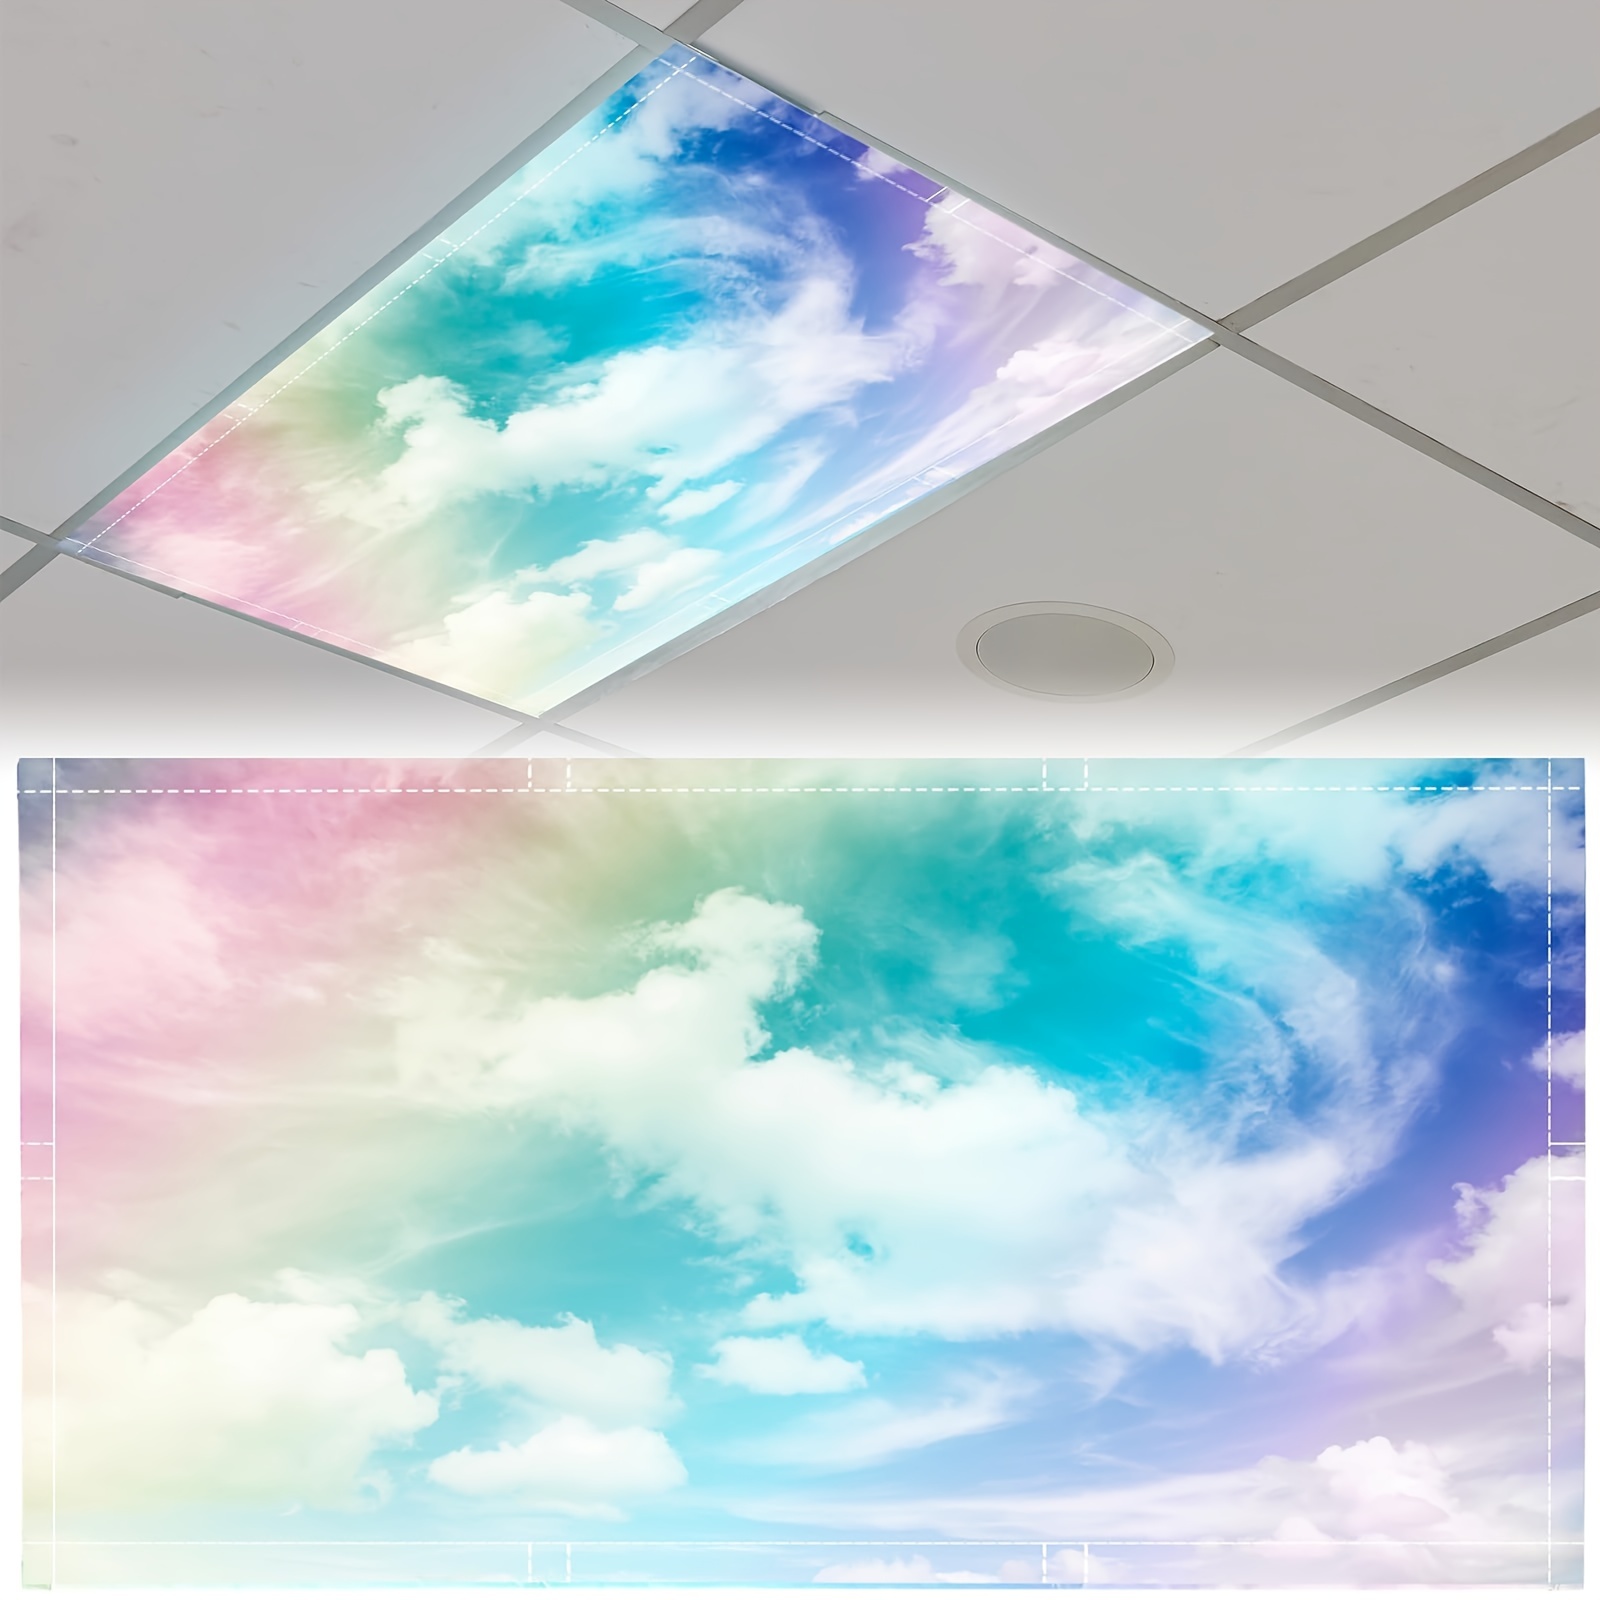 

1pc, Fluorescent Light Cover With Magnets, Cloud Design Fabric Filter For Classroom And Home Office Lighting, Modern Style, Colorful Cloud Pattern